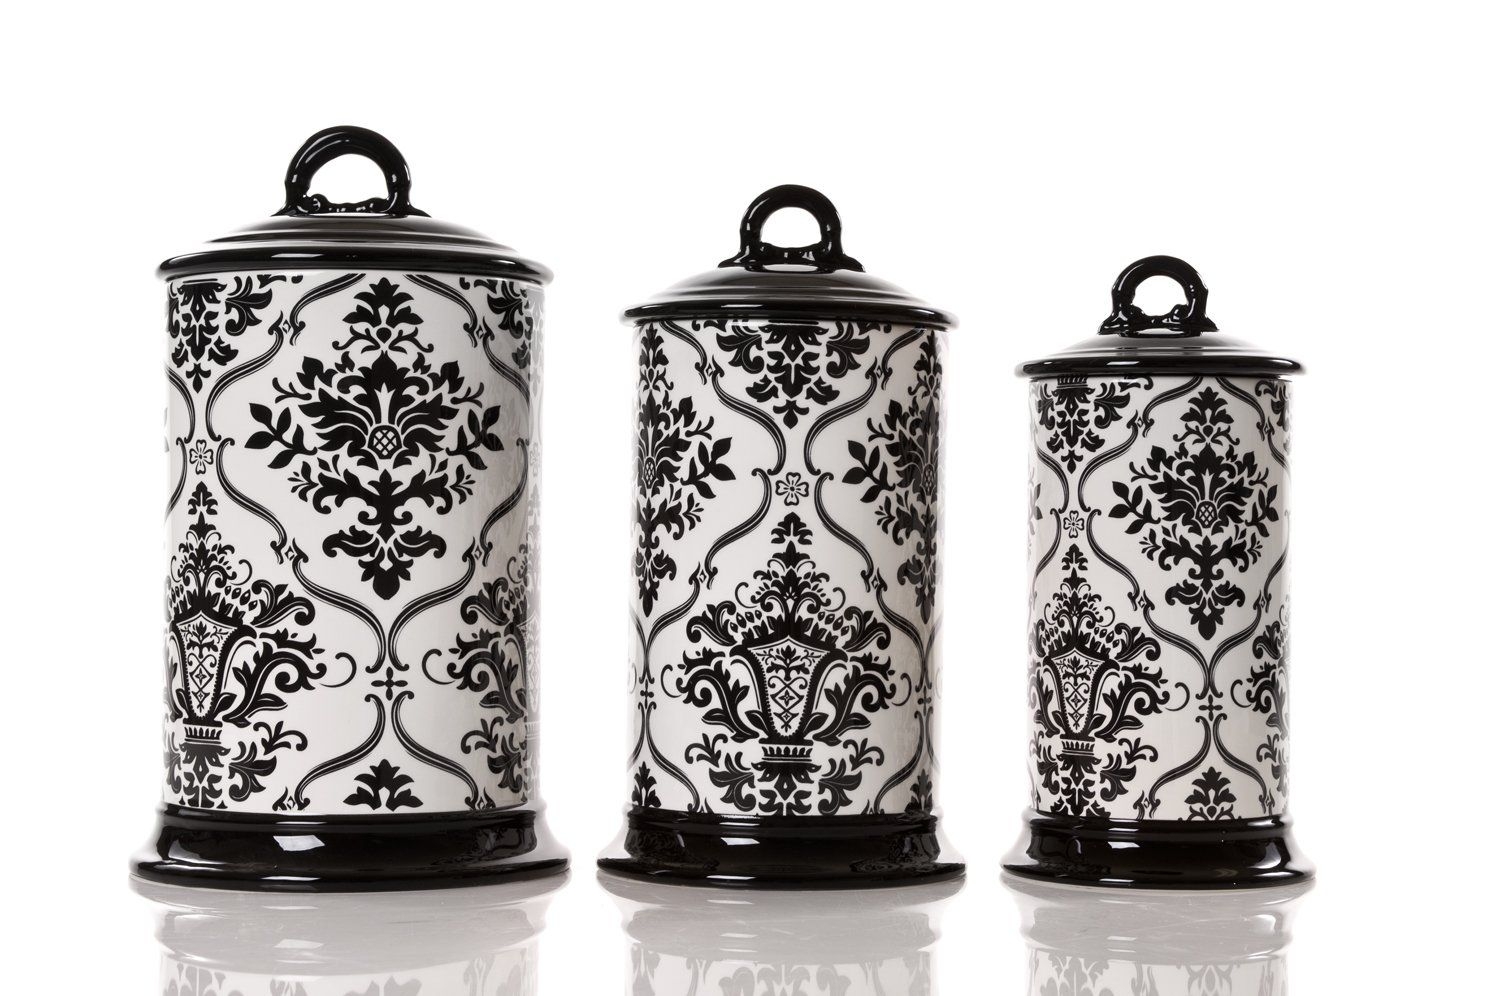 Black and white kitchen canisters